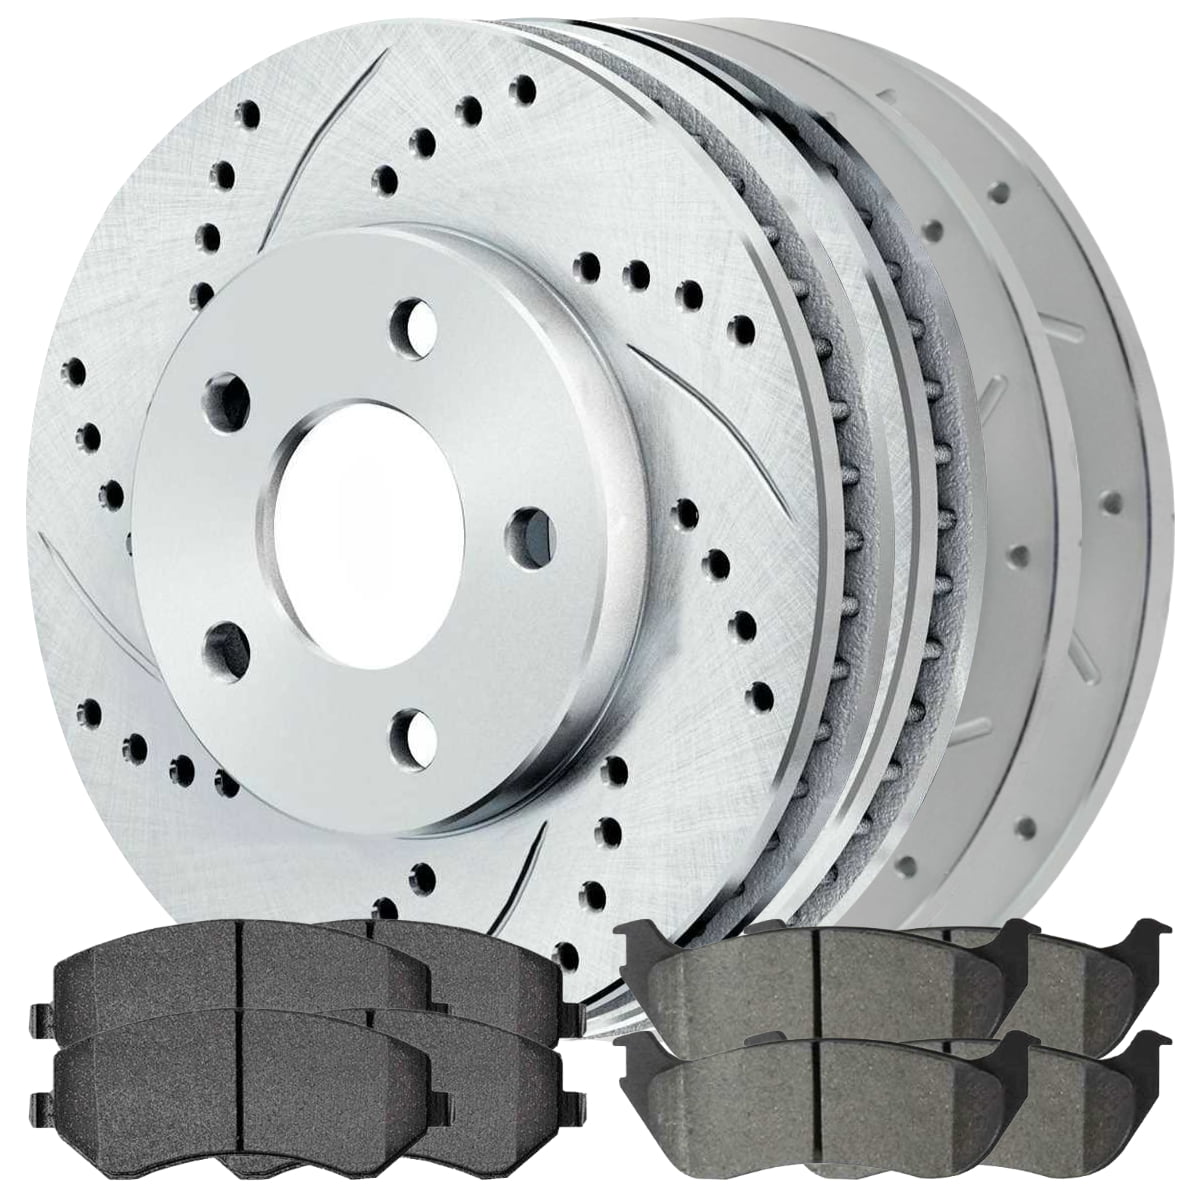 Detroit Axle Complete FRONT & REAR DRILLED and SLOTTED Brake Rotors & Ceramic Brake Pads w/Hardware fits 2003 2004 2005 2006 2007 Jeep Liberty 